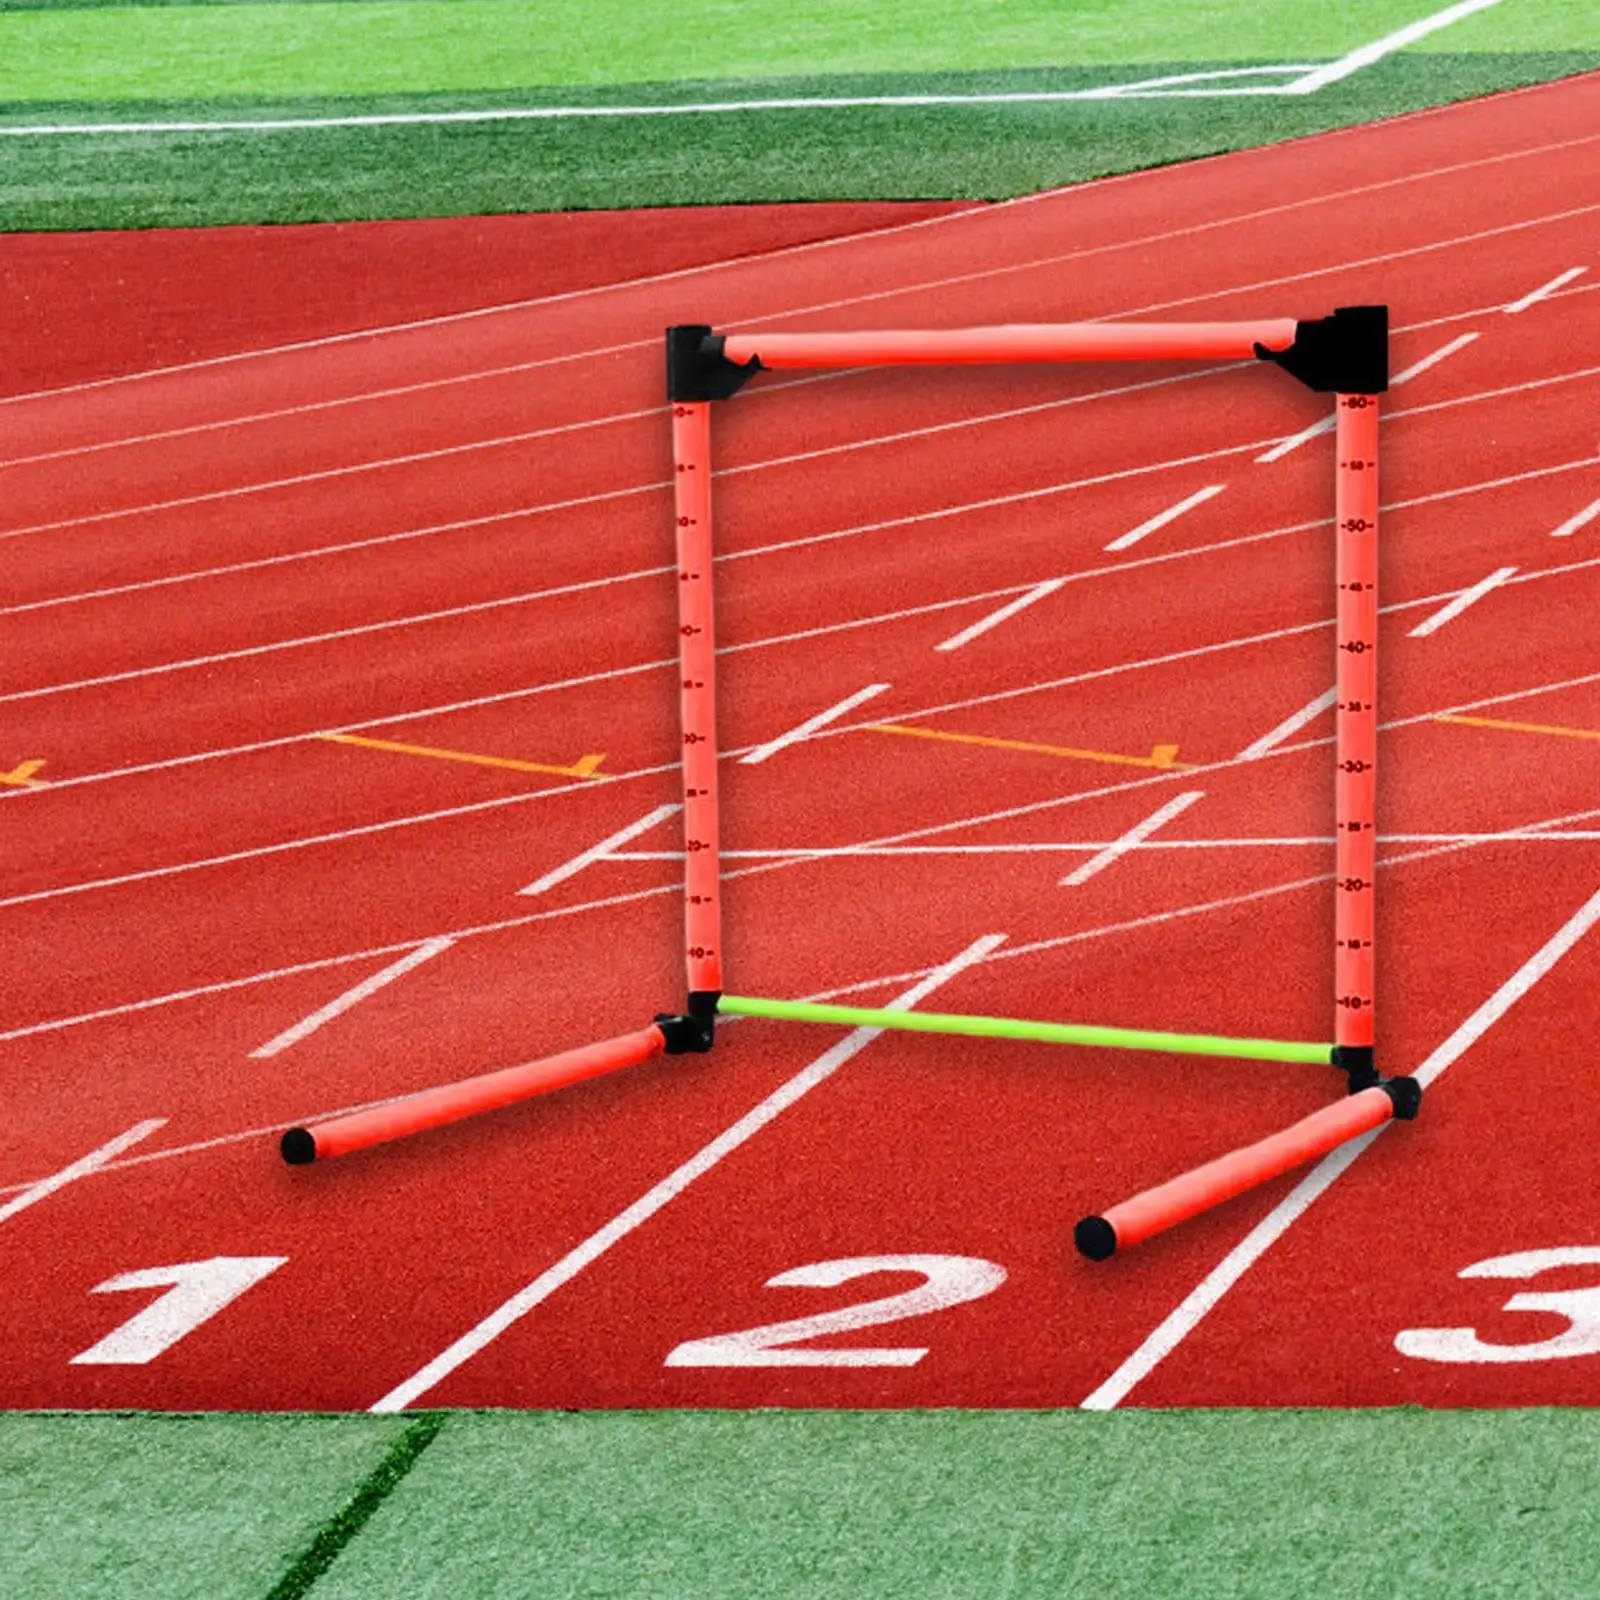 Agility Hurdles Track and Field Improves Coordination Adjustable Scale for Hurdle Training Soccer Football Athletes Racing